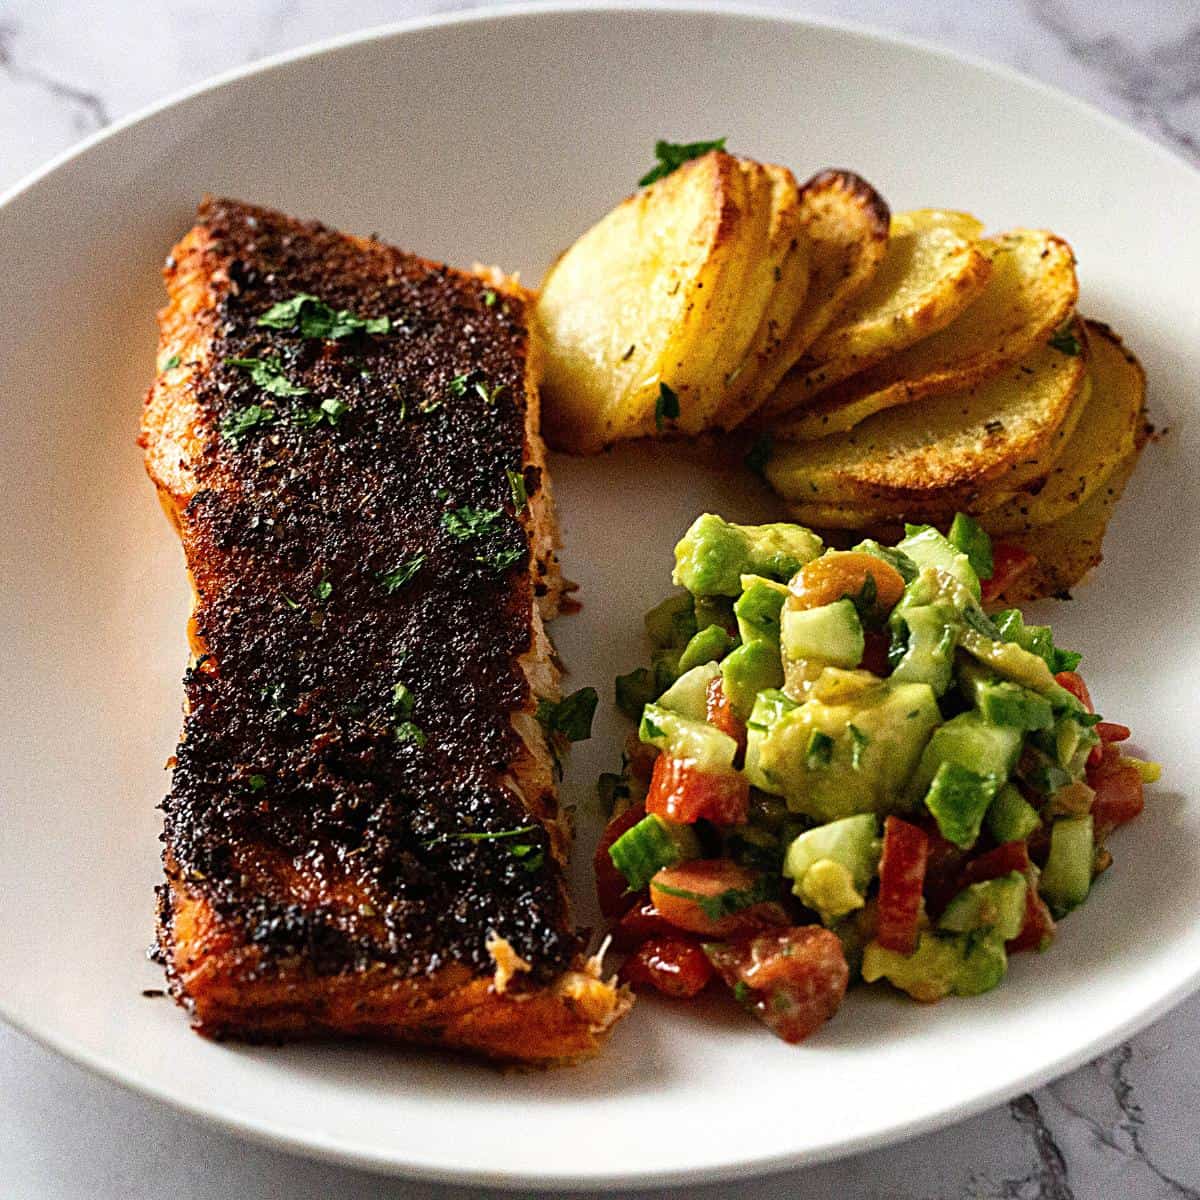 A plate with salmon salad and potatoes.